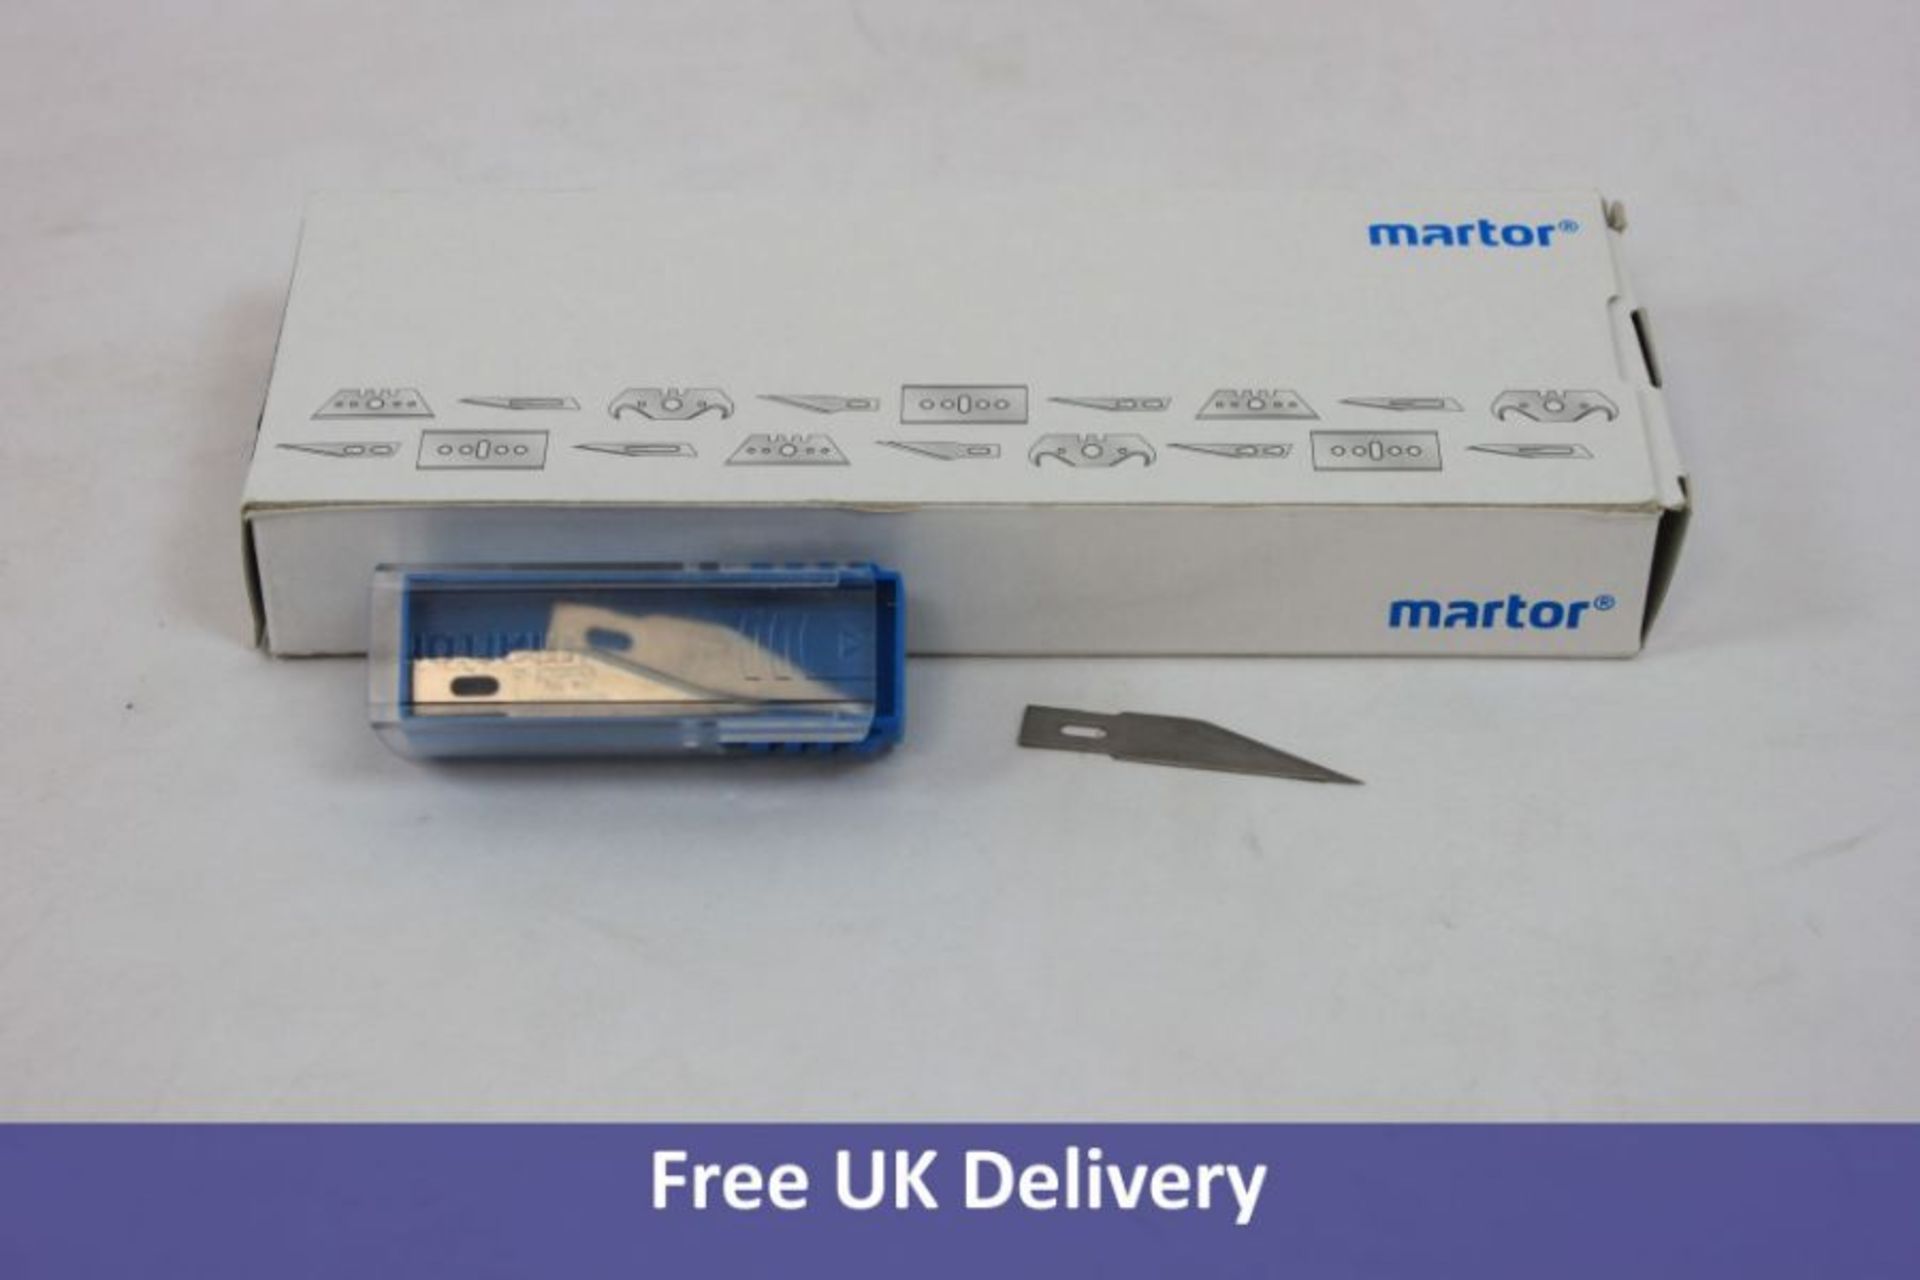 Ten Packs of 10 Mator Replacement Graphic Blade. Over 18+ Only